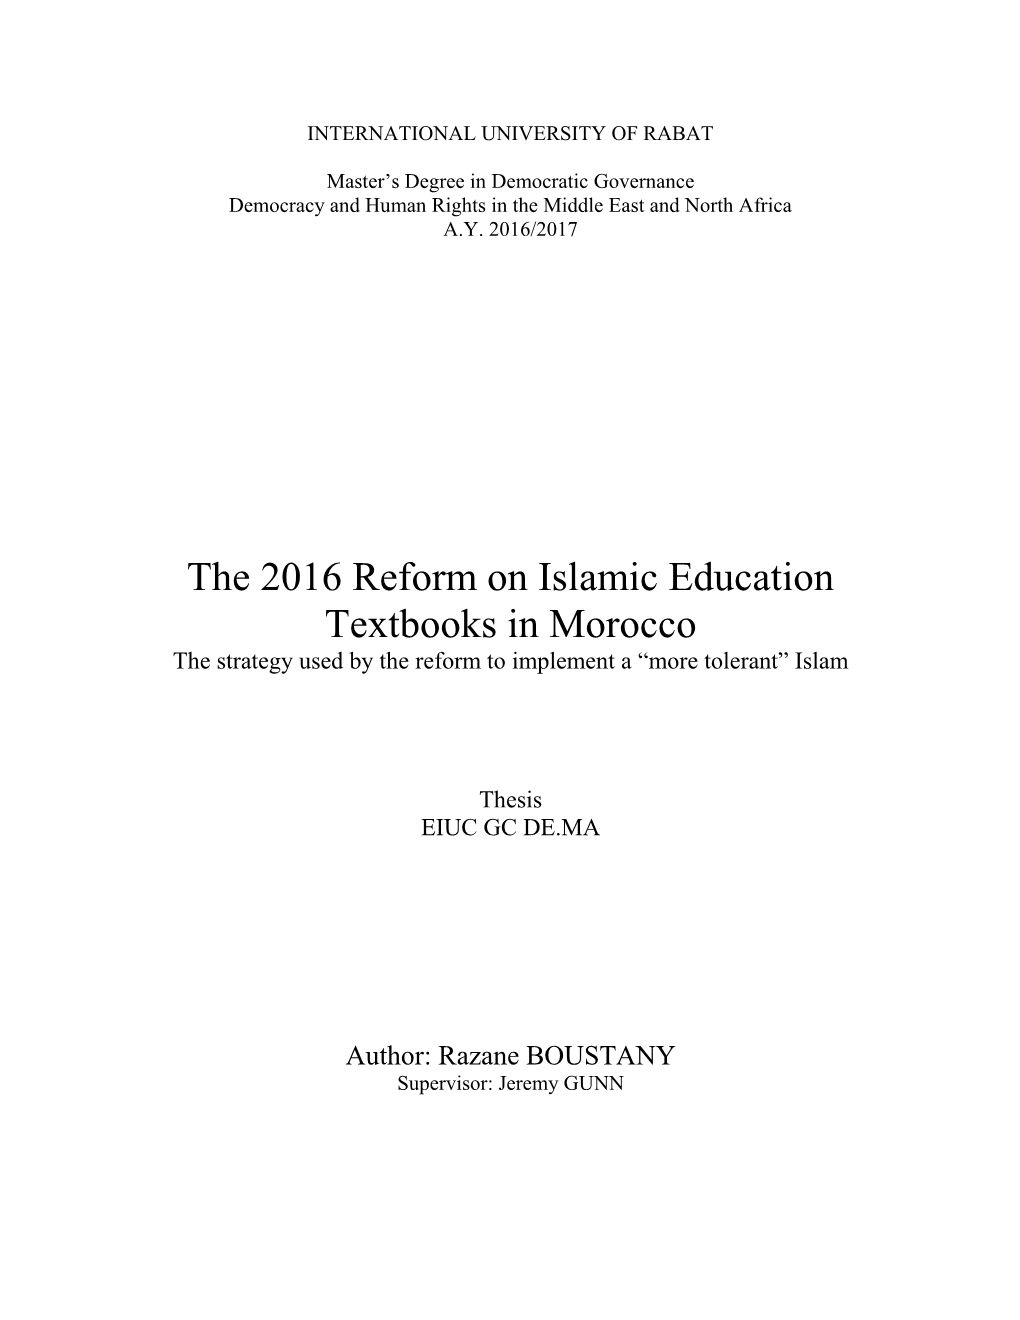 The 2016 Reform on Islamic Education Textbooks in Morocco the Strategy Used by the Reform to Implement a “More Tolerant” Islam